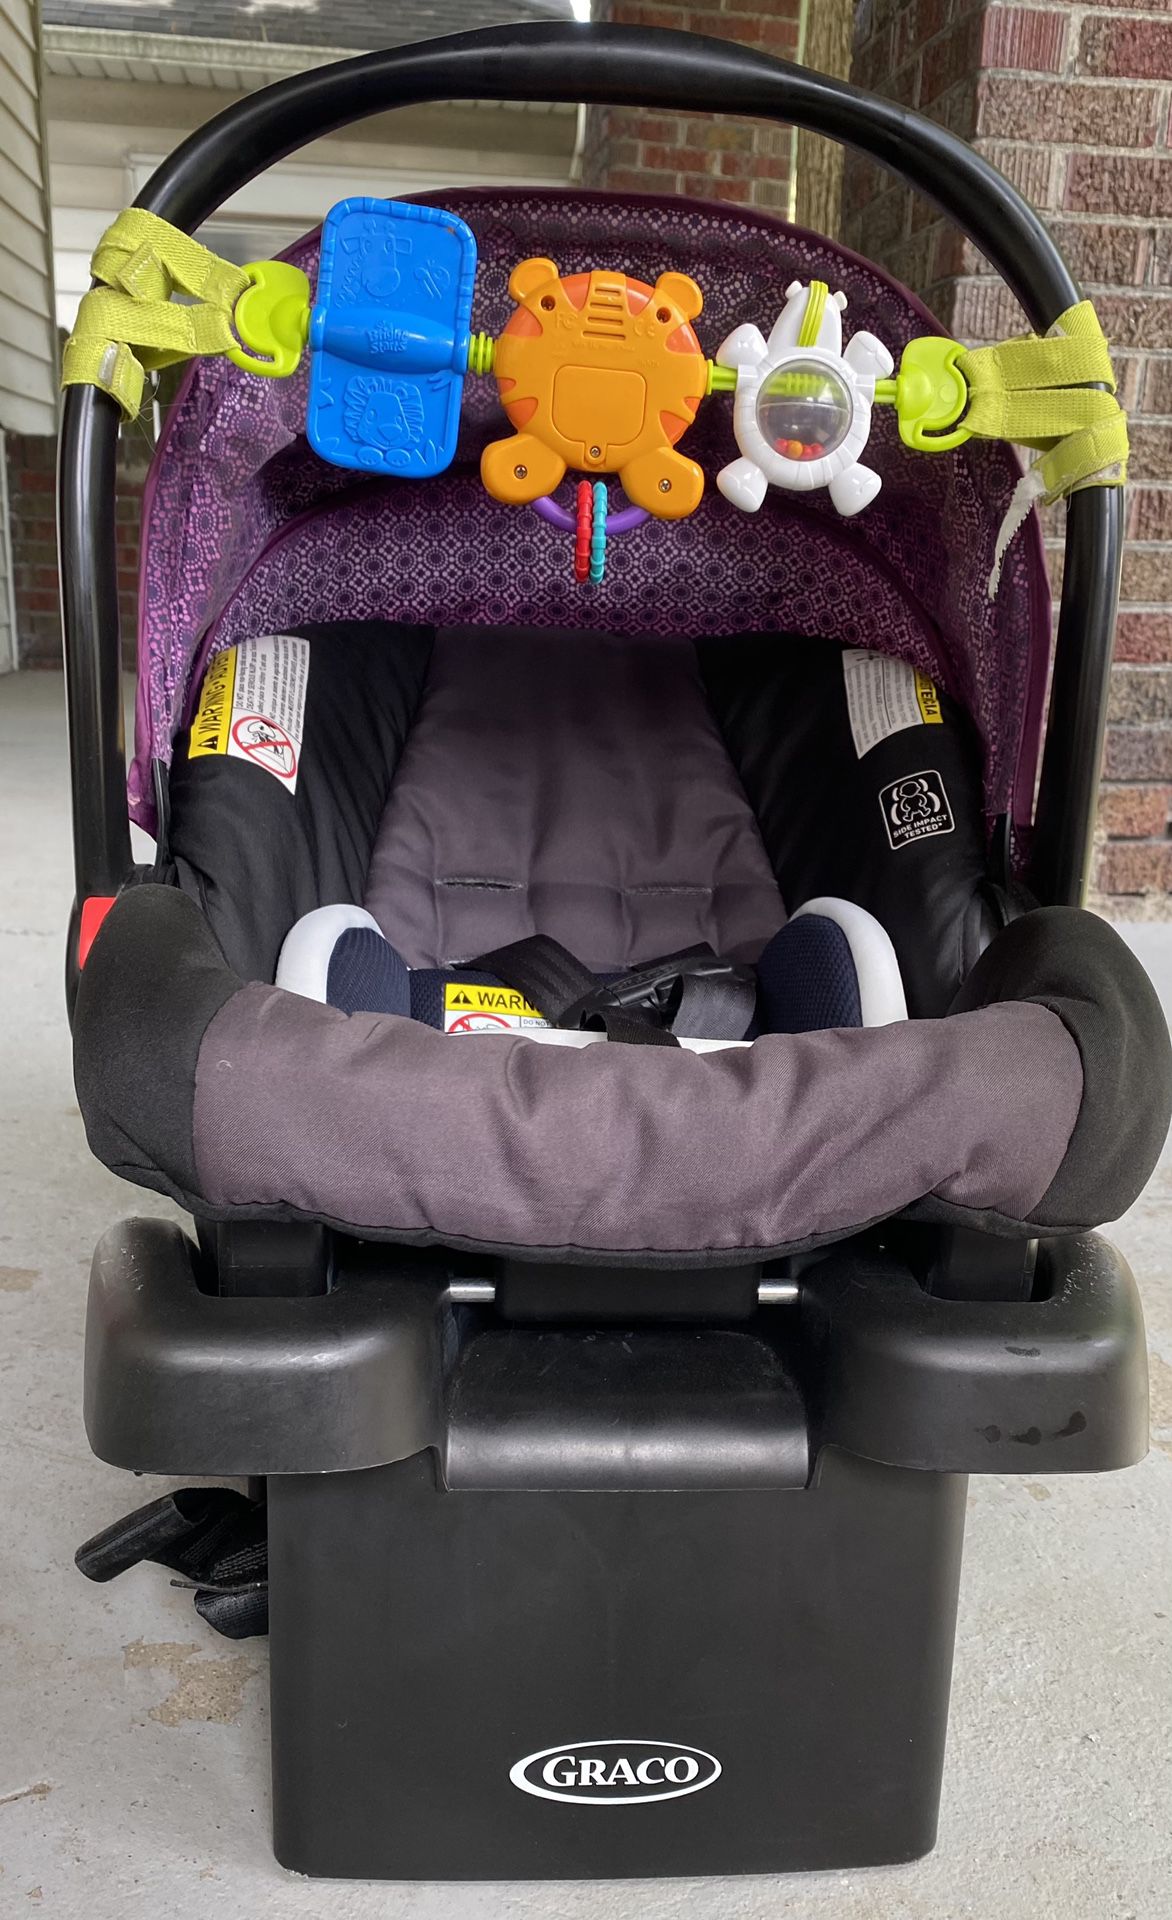 I Need Gas ⛽️ ! Like New Graco SnugRide SnugLock 30 Infant Car Seat with Toys